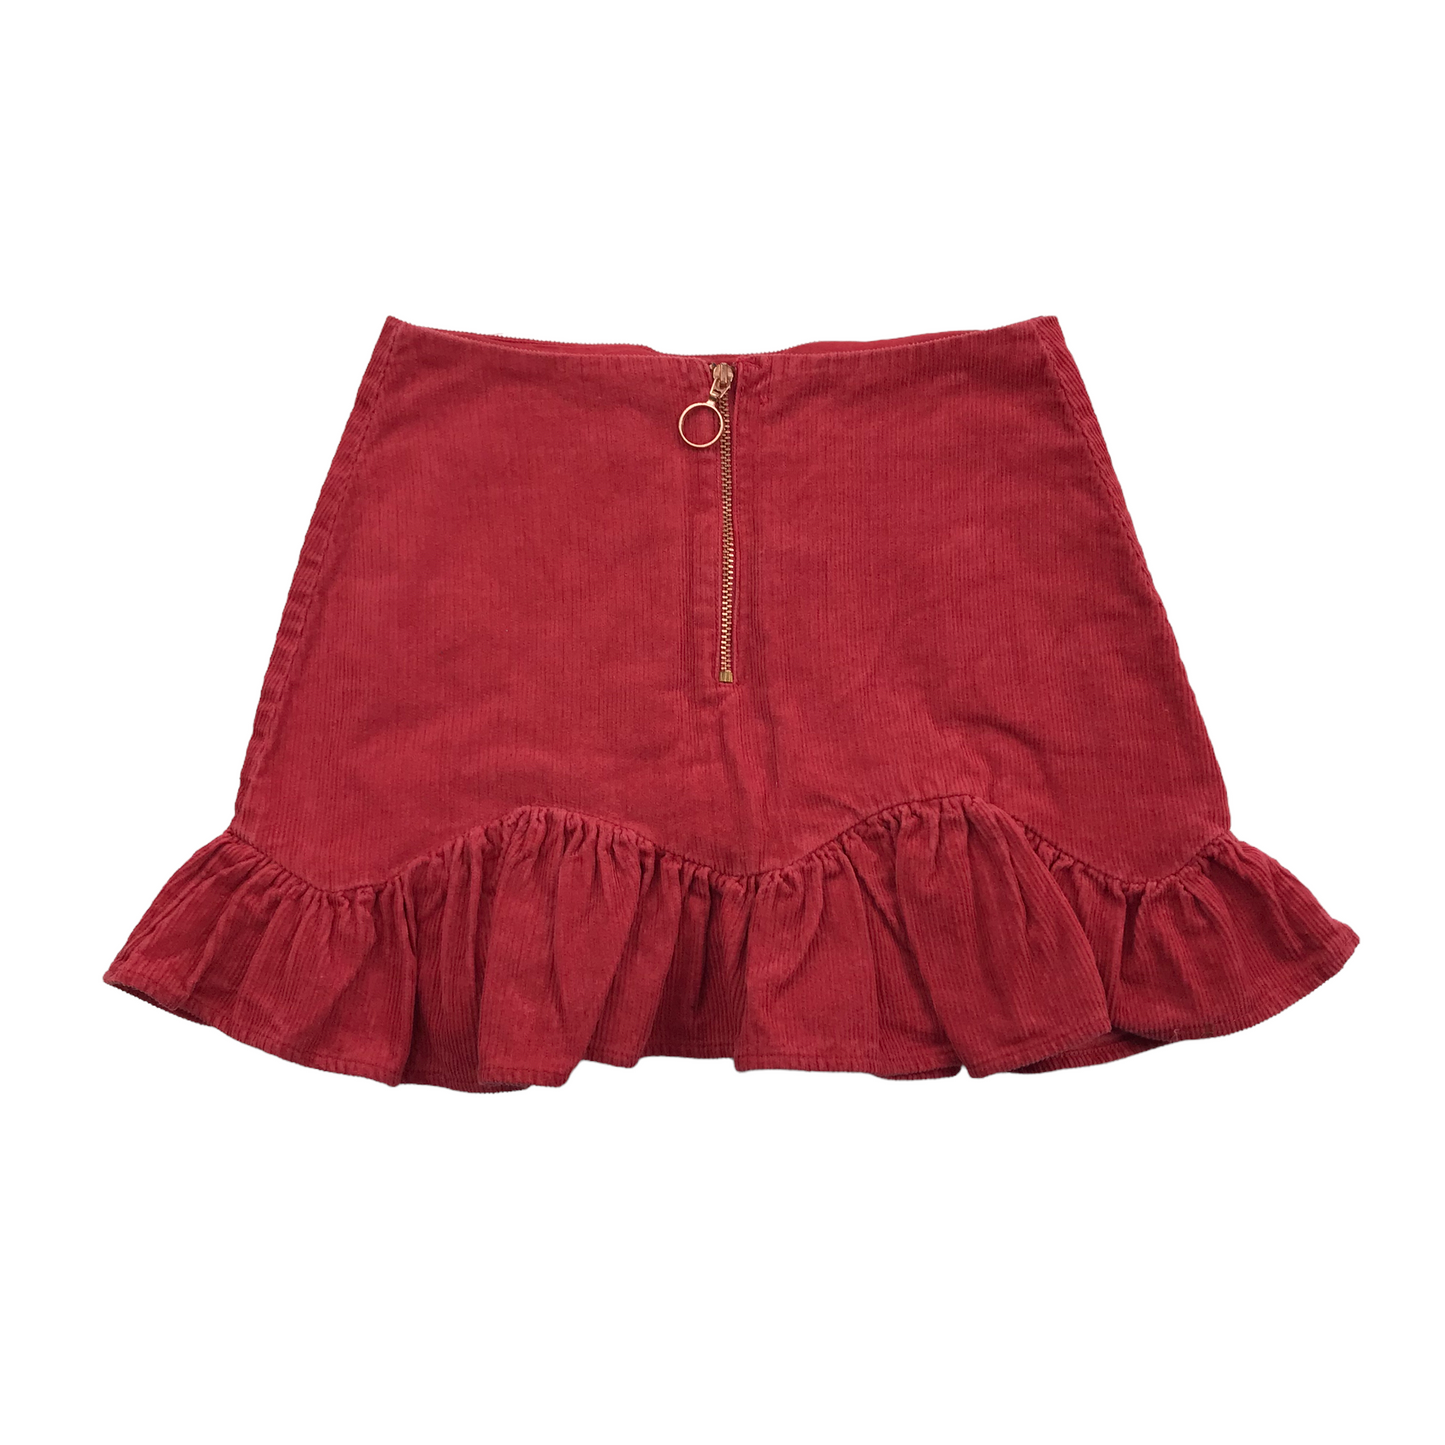 M&S Red Corduroy Love Heart Skirt with Frilled Hem Age 6